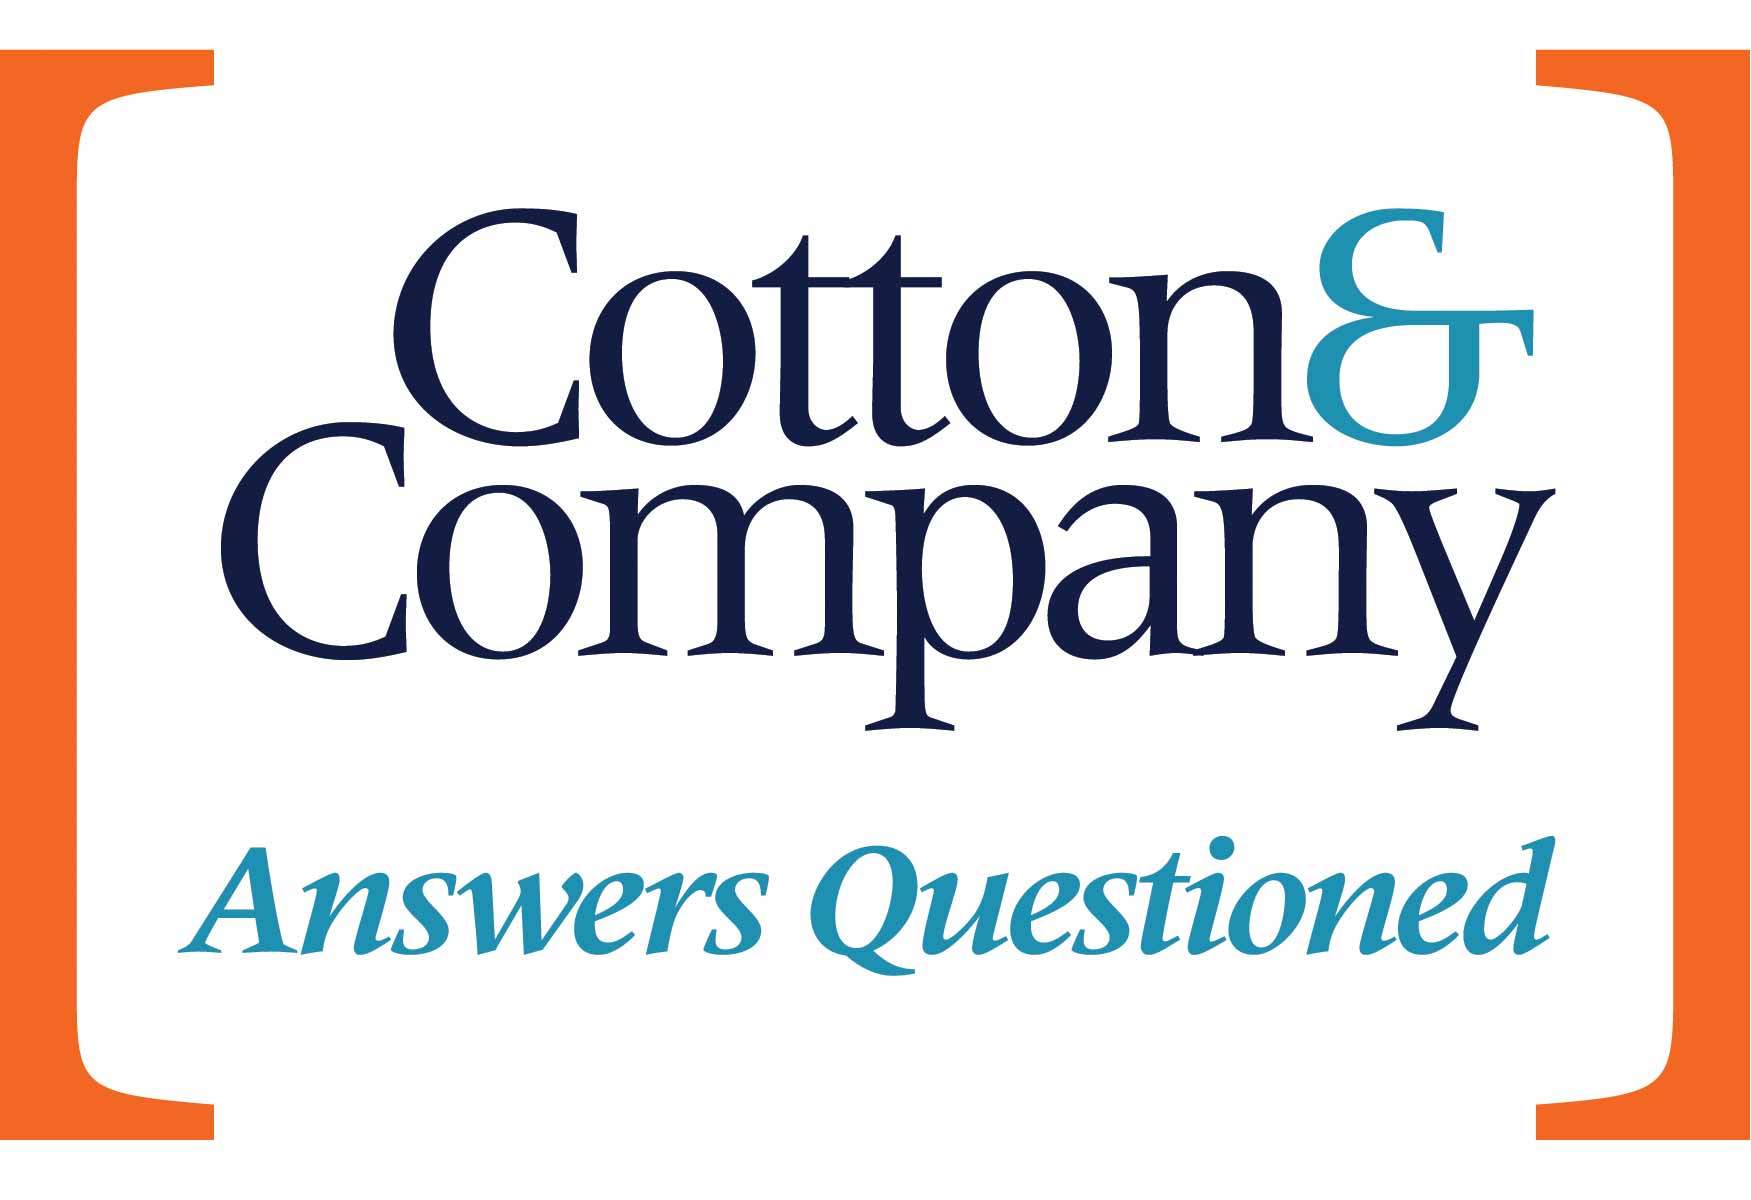 In company answers. Cotton and what Company logo.